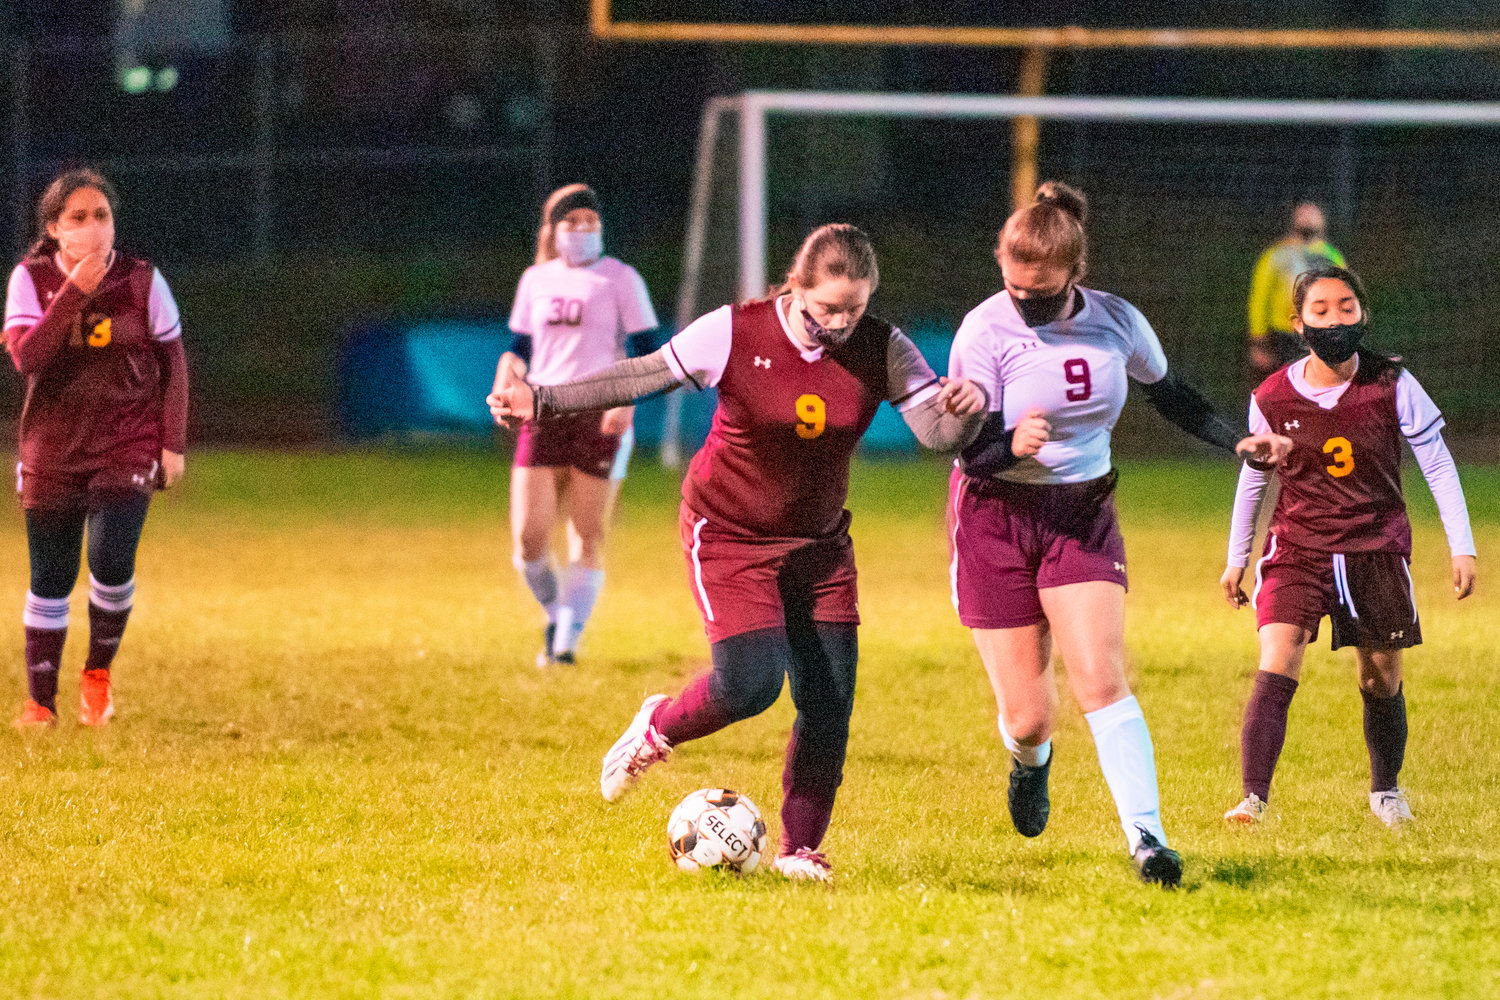 Cardinals’ Maggie Maddox (9) fights for possession of the ball during a game Wednesday night in Winlock.